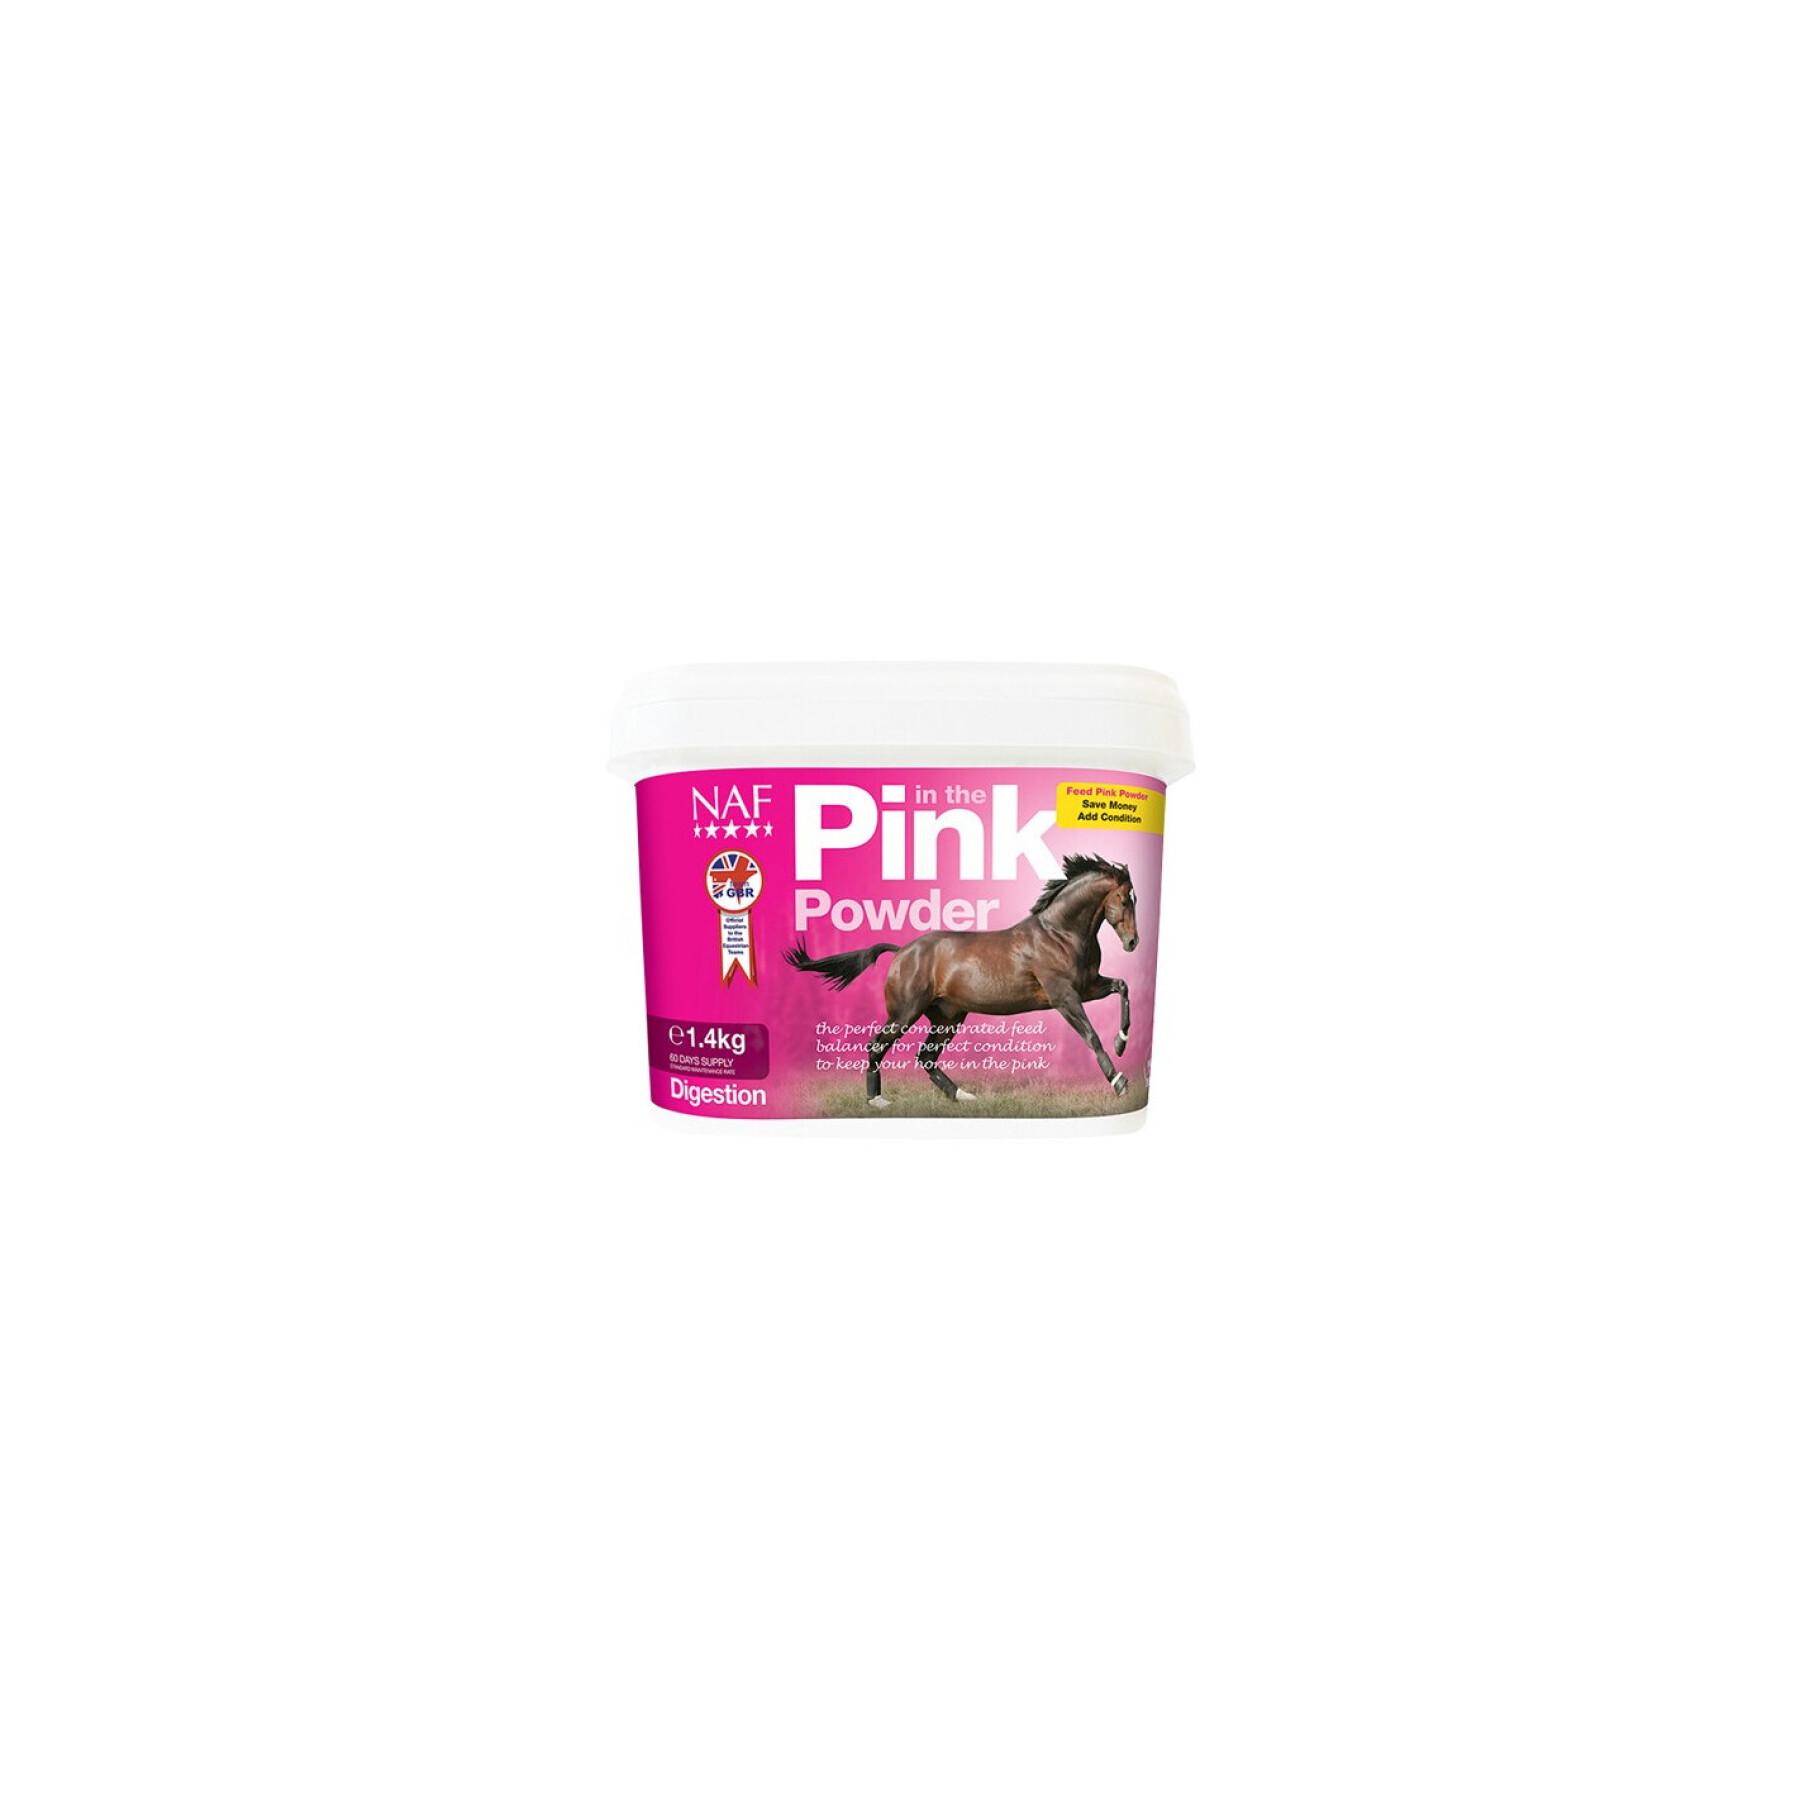 Food supplement digestion for horses NAF In the Pink Powder